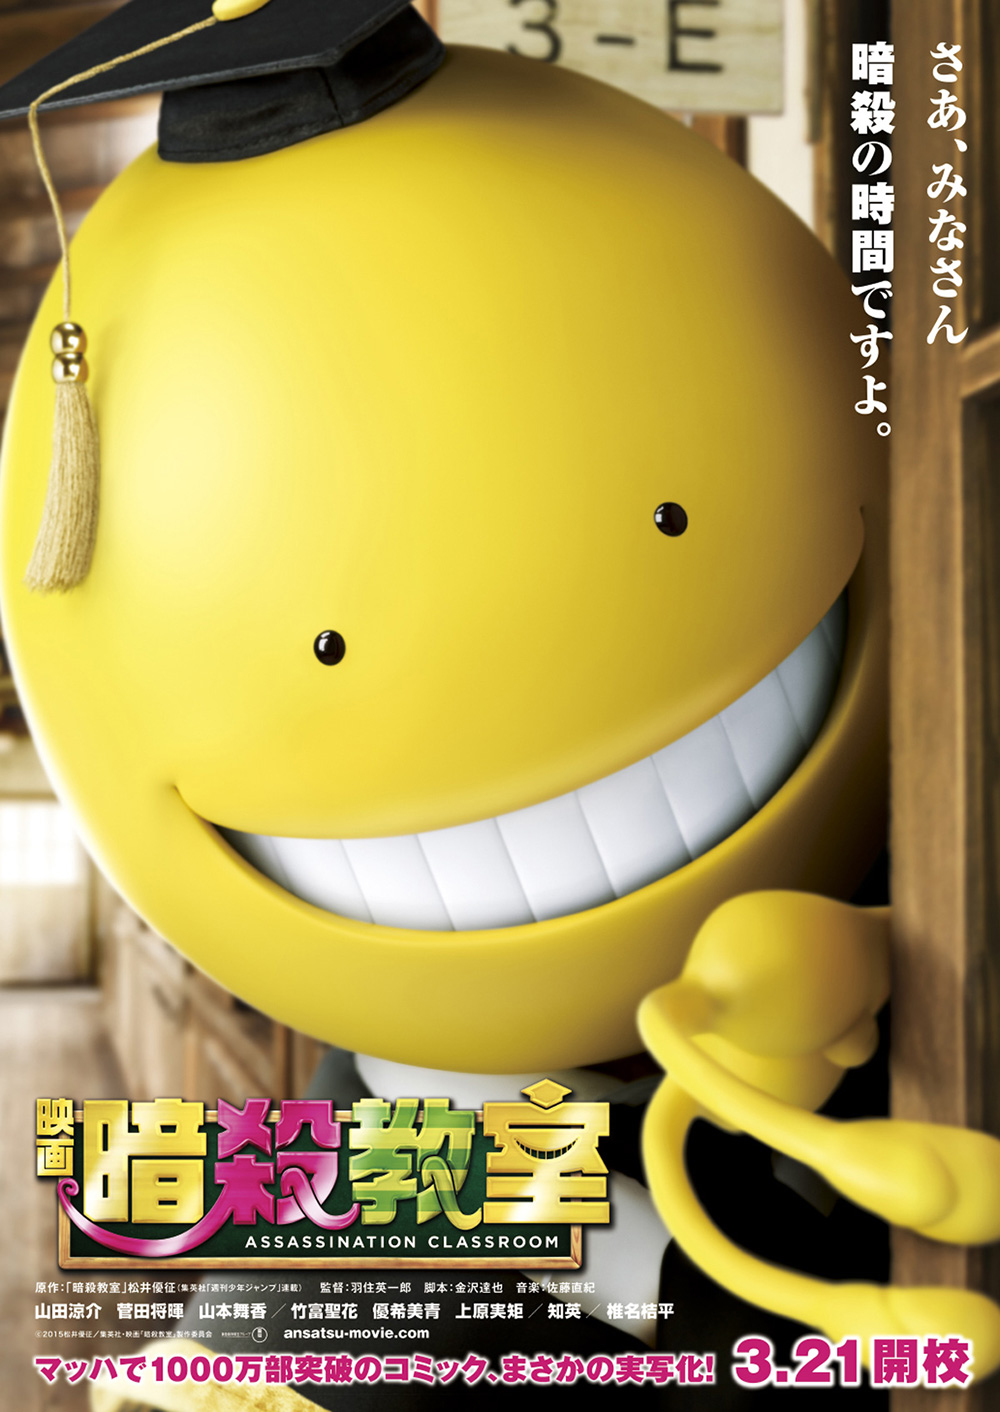 Assassination-Classroom-Live-Action-Poster